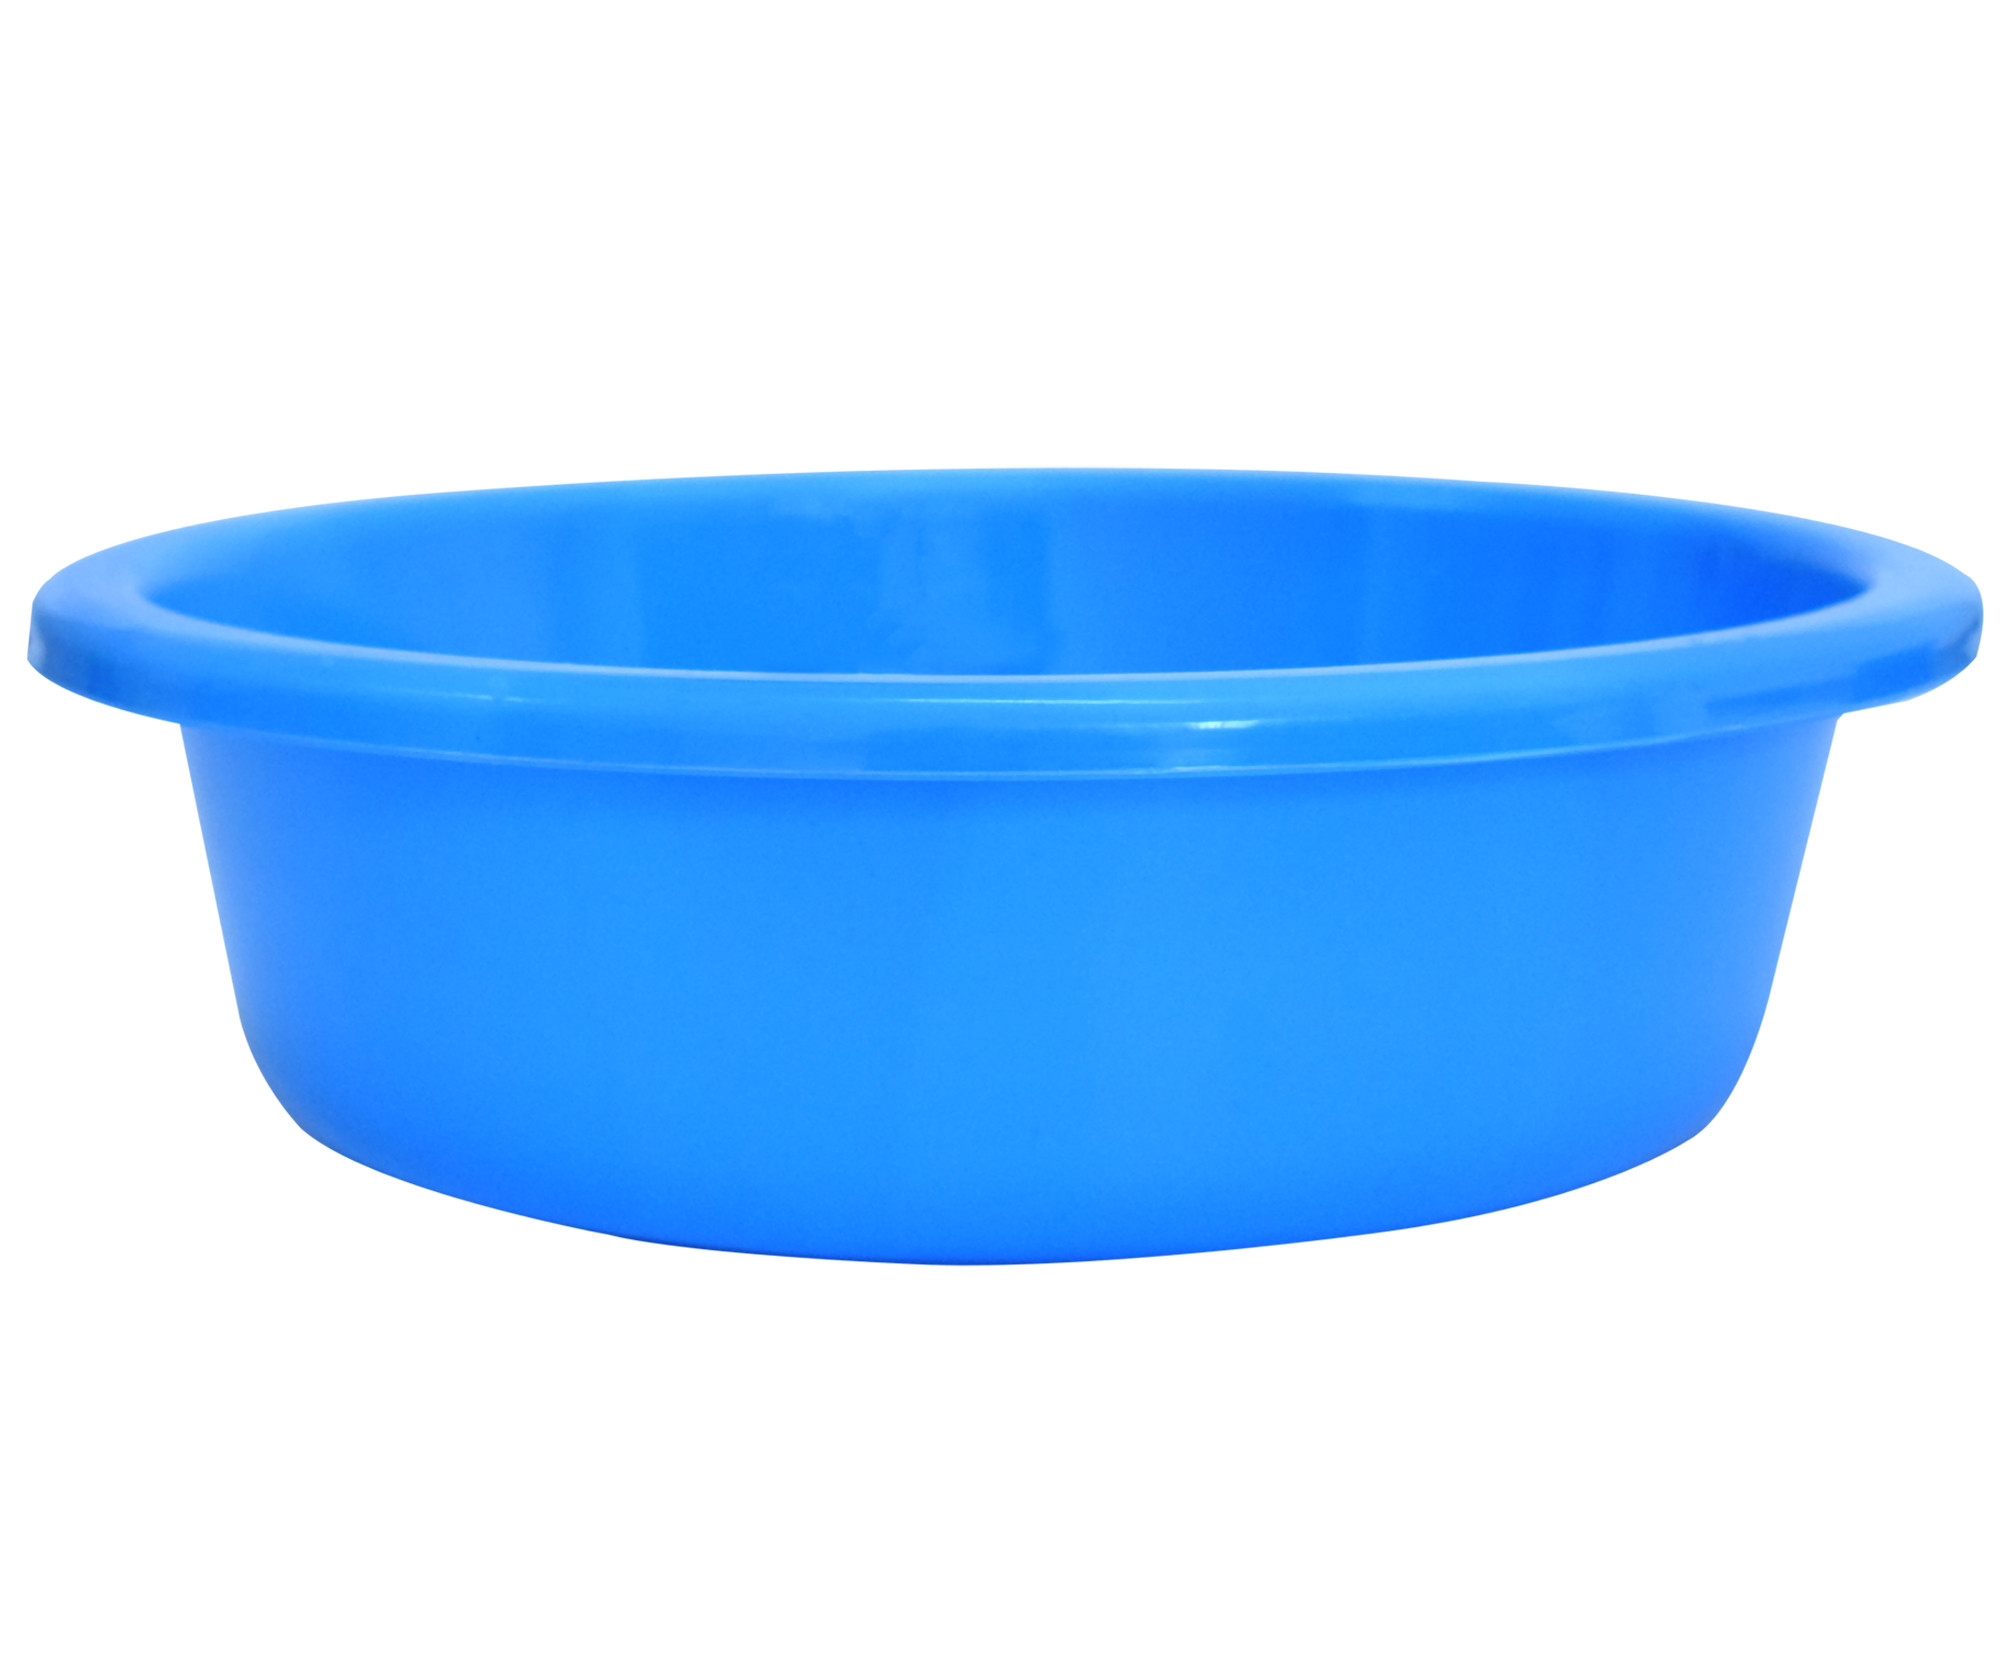 Kuber Industries Multiuses Unbreakable Plastic Knead Dough Basket/Basin Bowl For Home & Kitchen 6 Ltr- Pack of 2 (Blue & Grey)